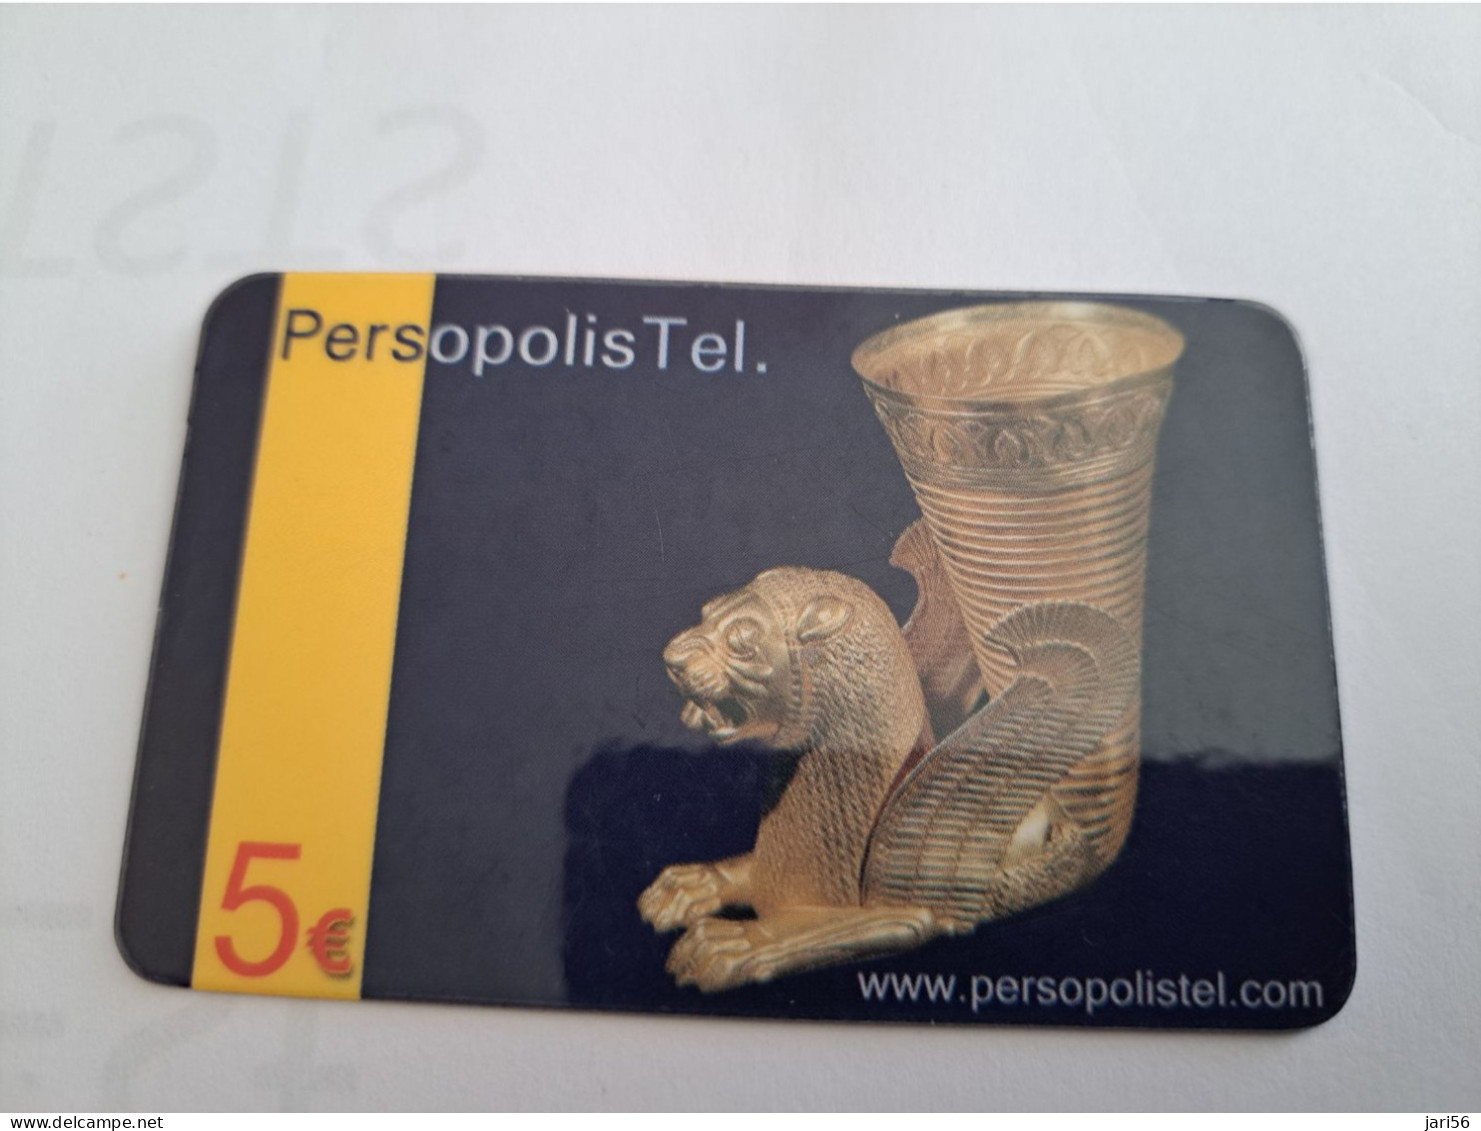 DUITSLAND/GERMANY  € 5,- / PERSOPOLIS TEL / LION HEAD   ON CARD        Fine Used  PREPAID  **16532** - [2] Mobile Phones, Refills And Prepaid Cards